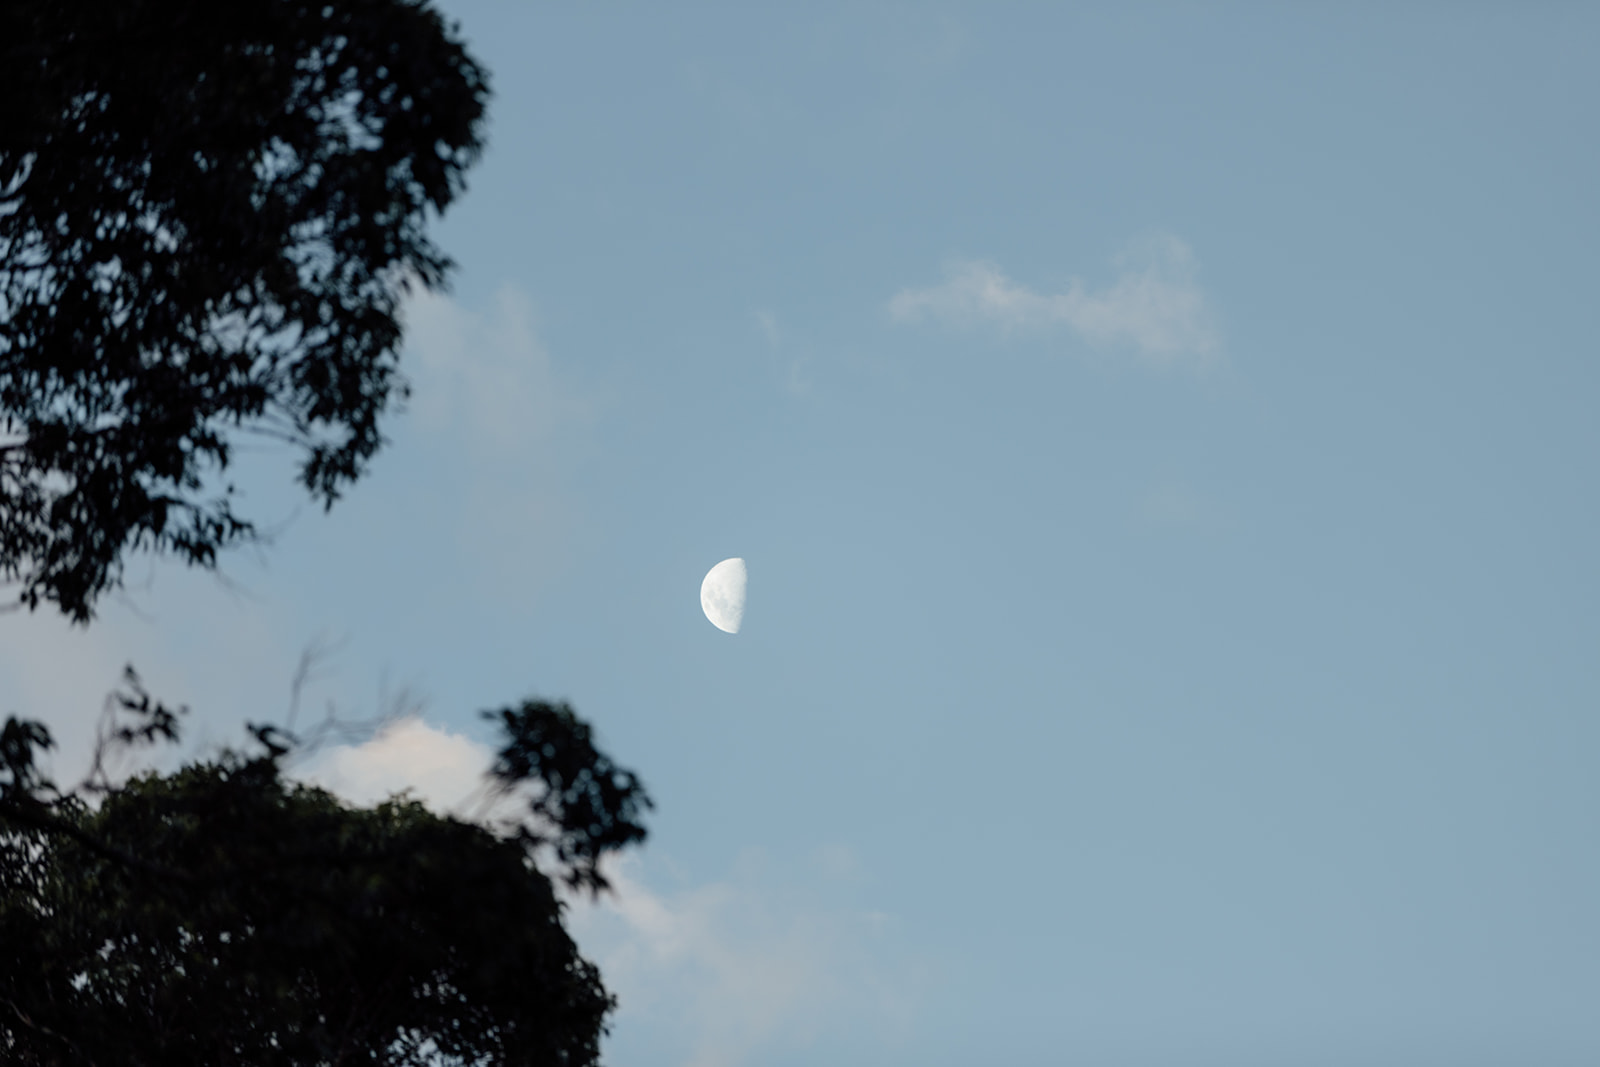 The moon and sky at dusk